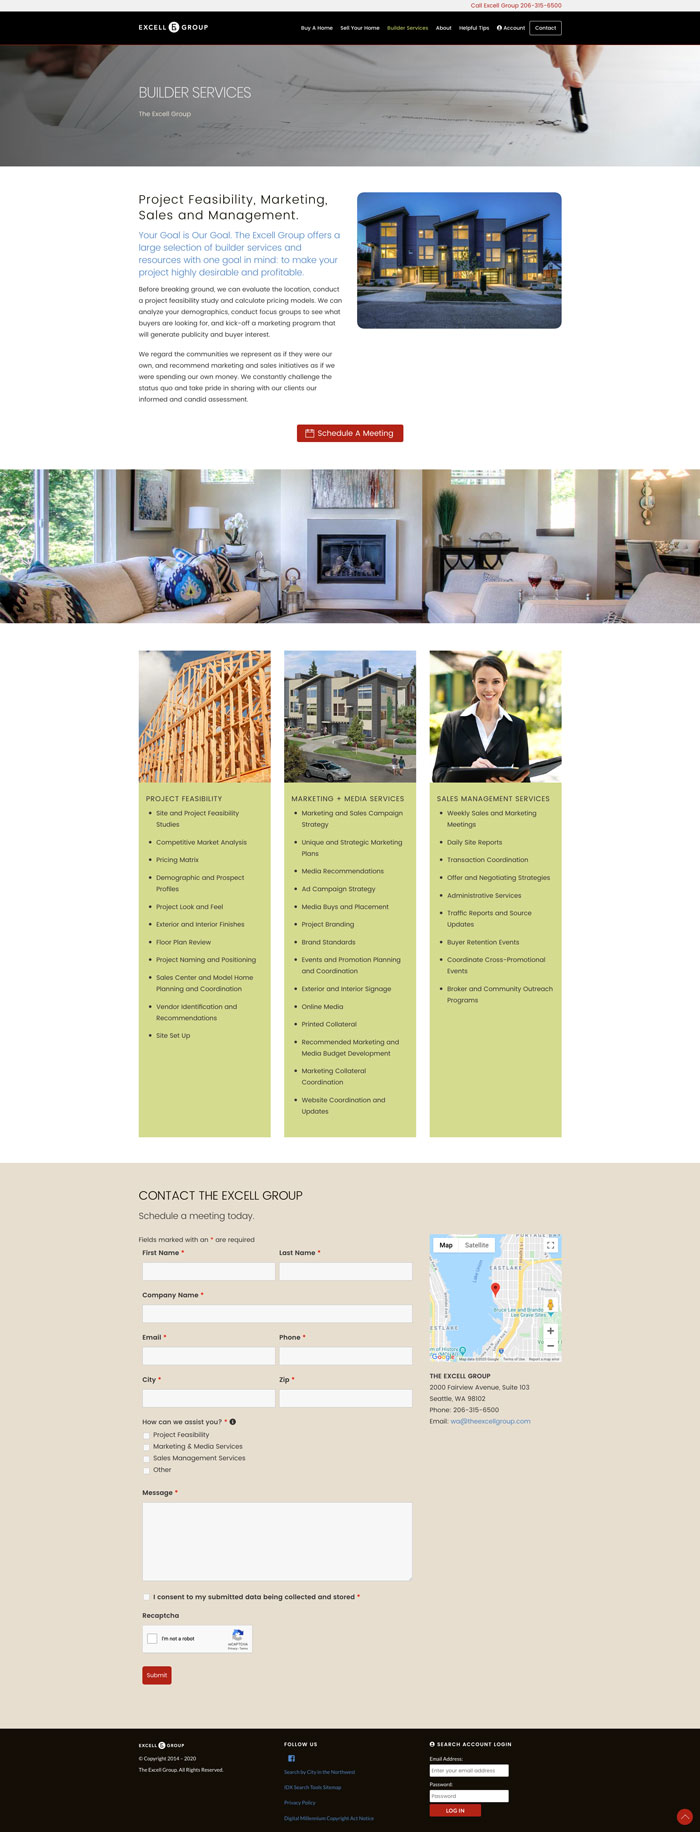 Excell Group Builder Services Page